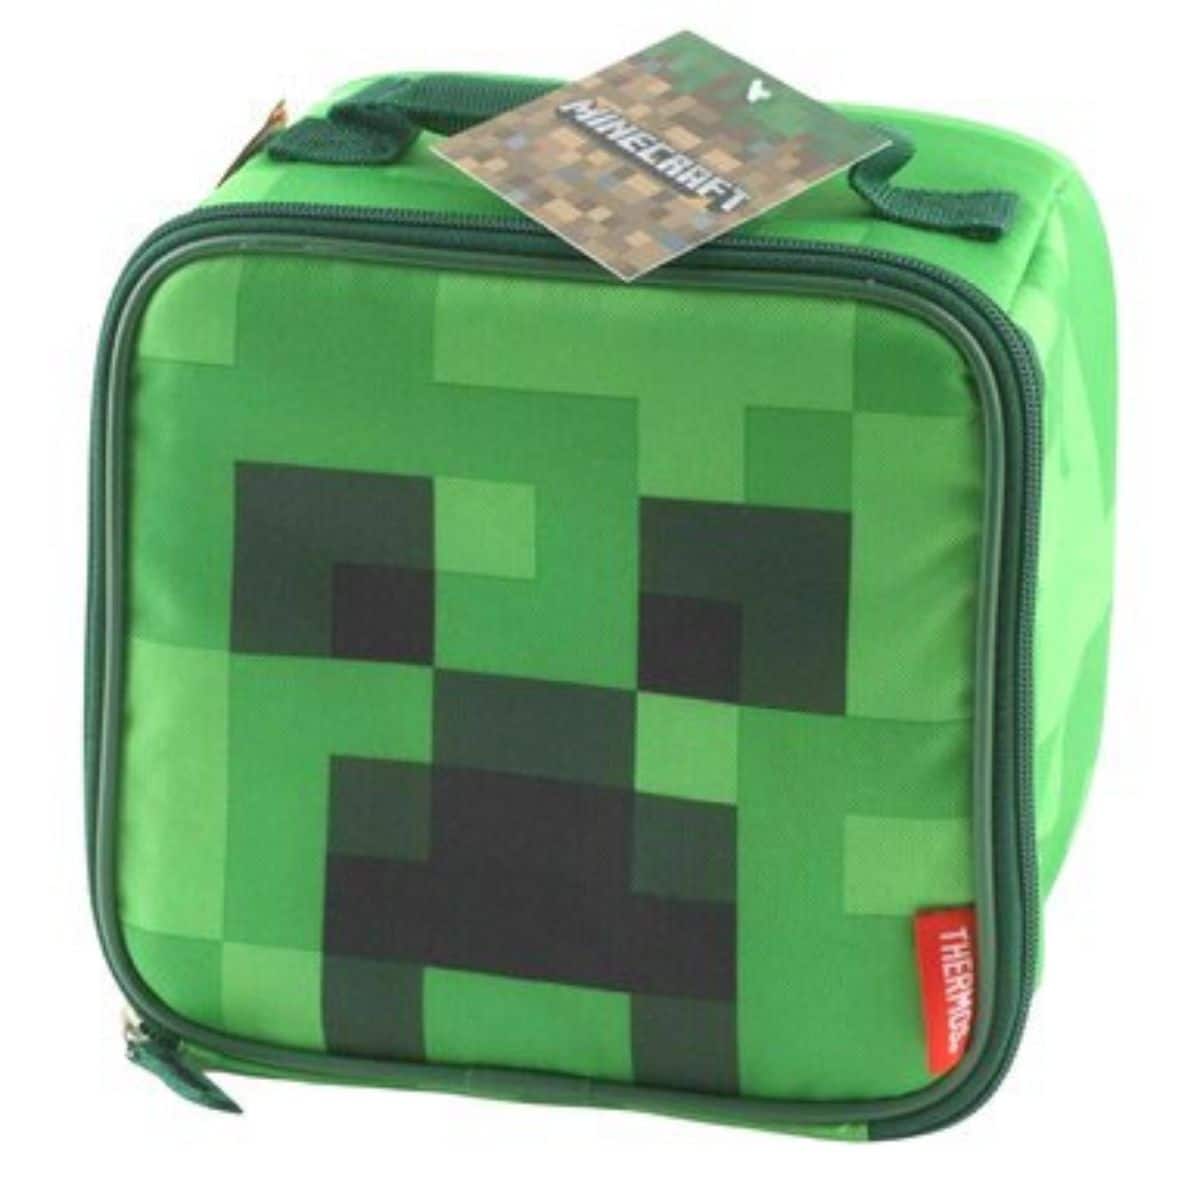 Thermos Kids Insulated Dual Compartment Lunch Bag, Minecraft 